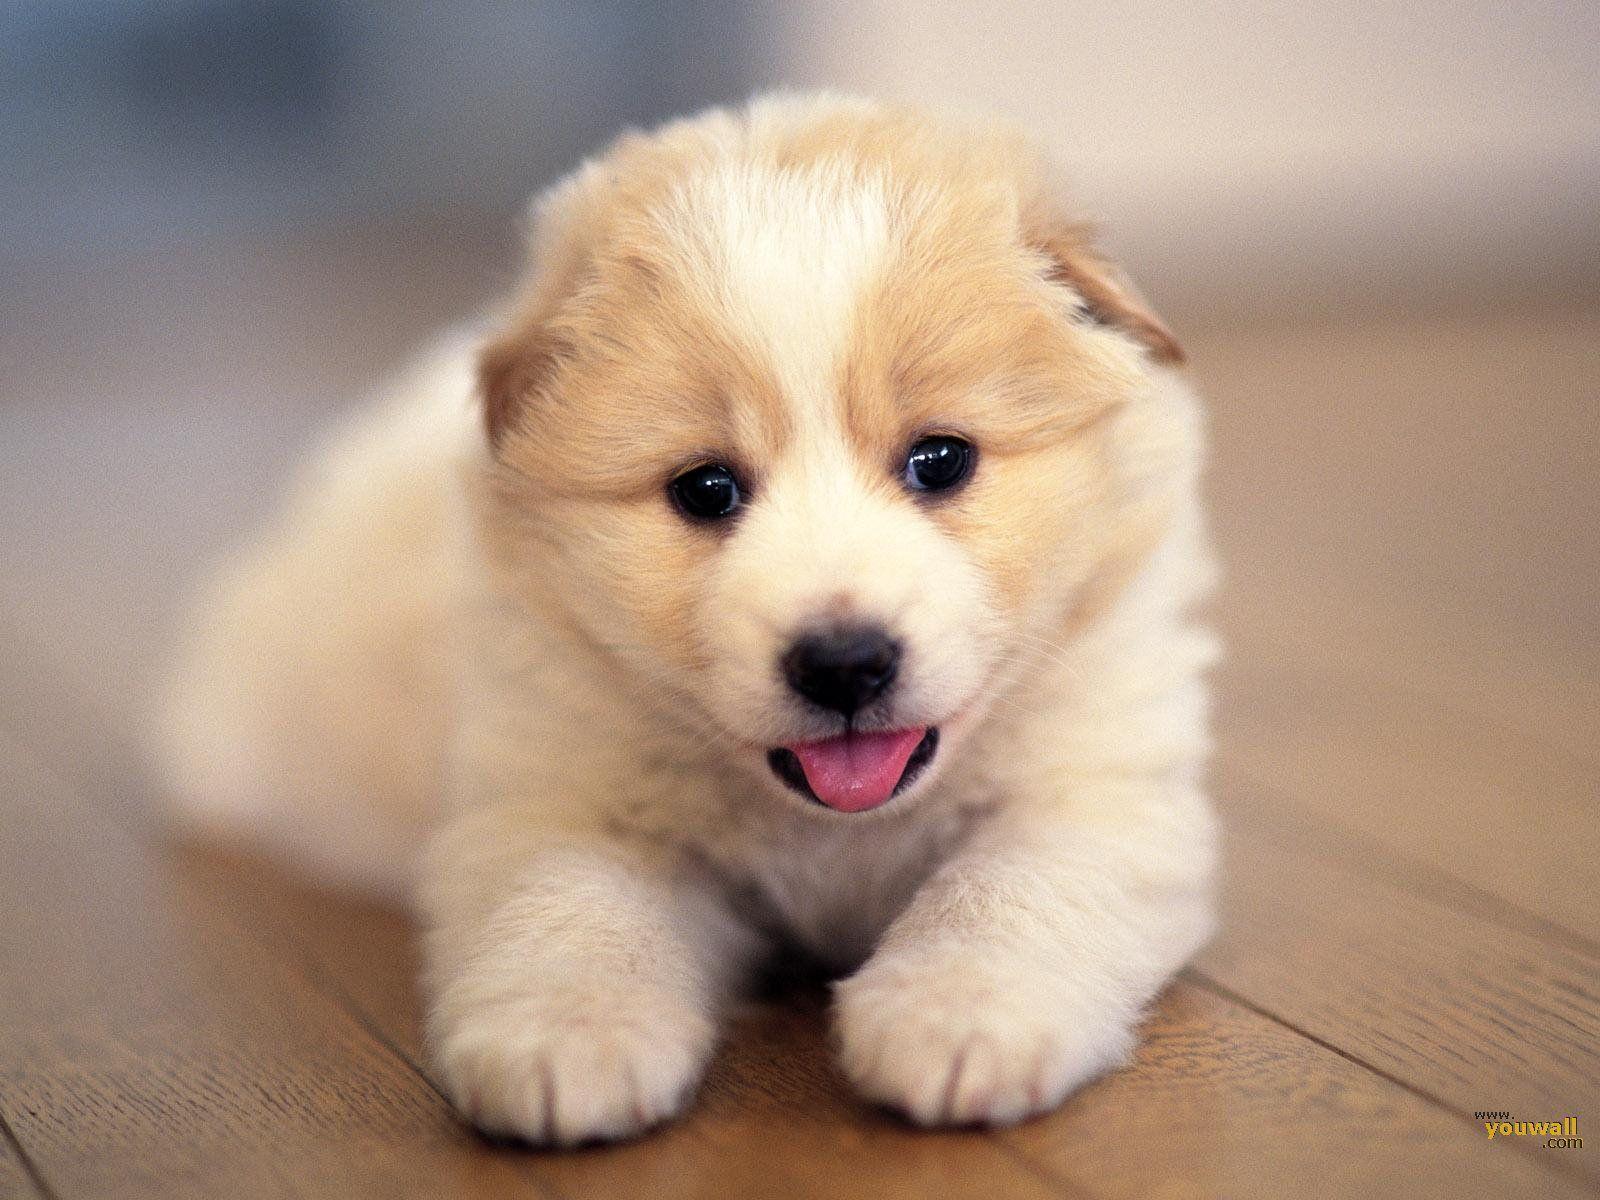 Wallpapers For > Cute Dog Wallpapers